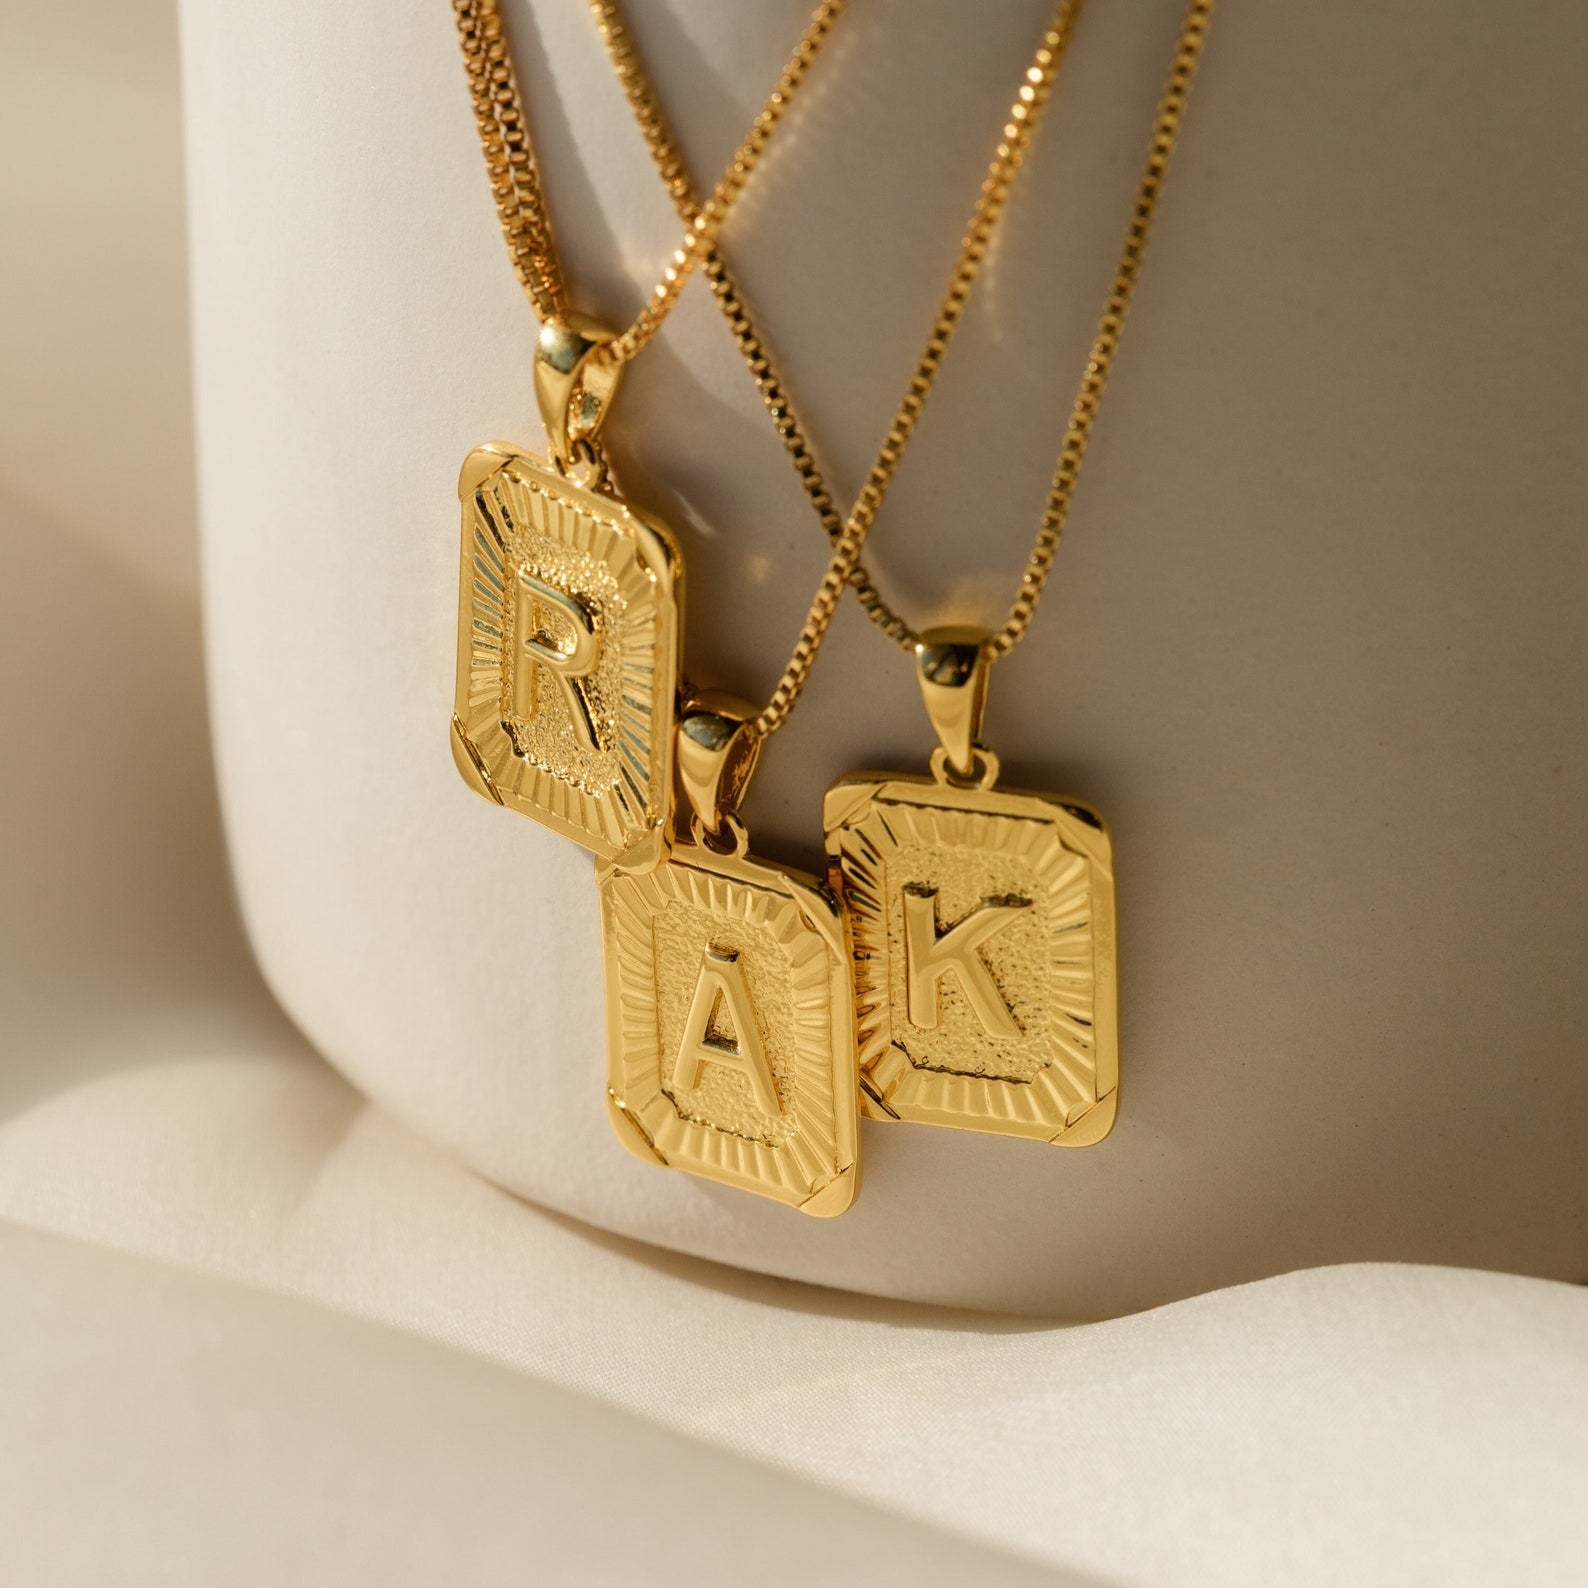 Make a statement with this Extra-Large Monogram Necklace! The pendant  measures over 2